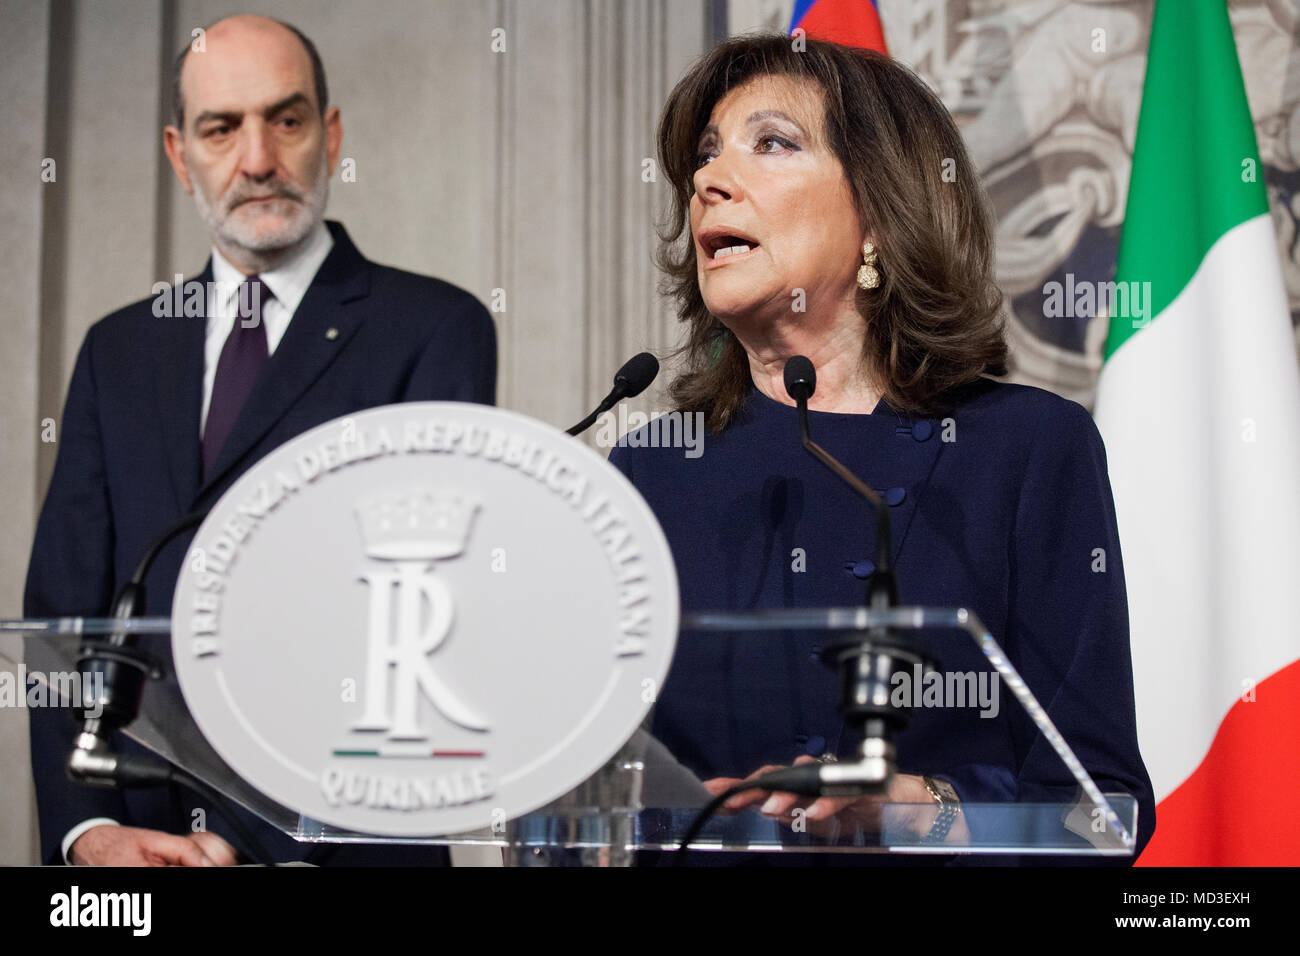 Rome, Italy. 18th April 2018. Italy Names Senate speaker Maria Elisabetta  Alberti Casellati as mediator to break political impasse during a news conference following her meeting with Italy's President Sergio Mattarella at the Quirinale Credit: Sara De Marco/Alamy Live News Stock Photo